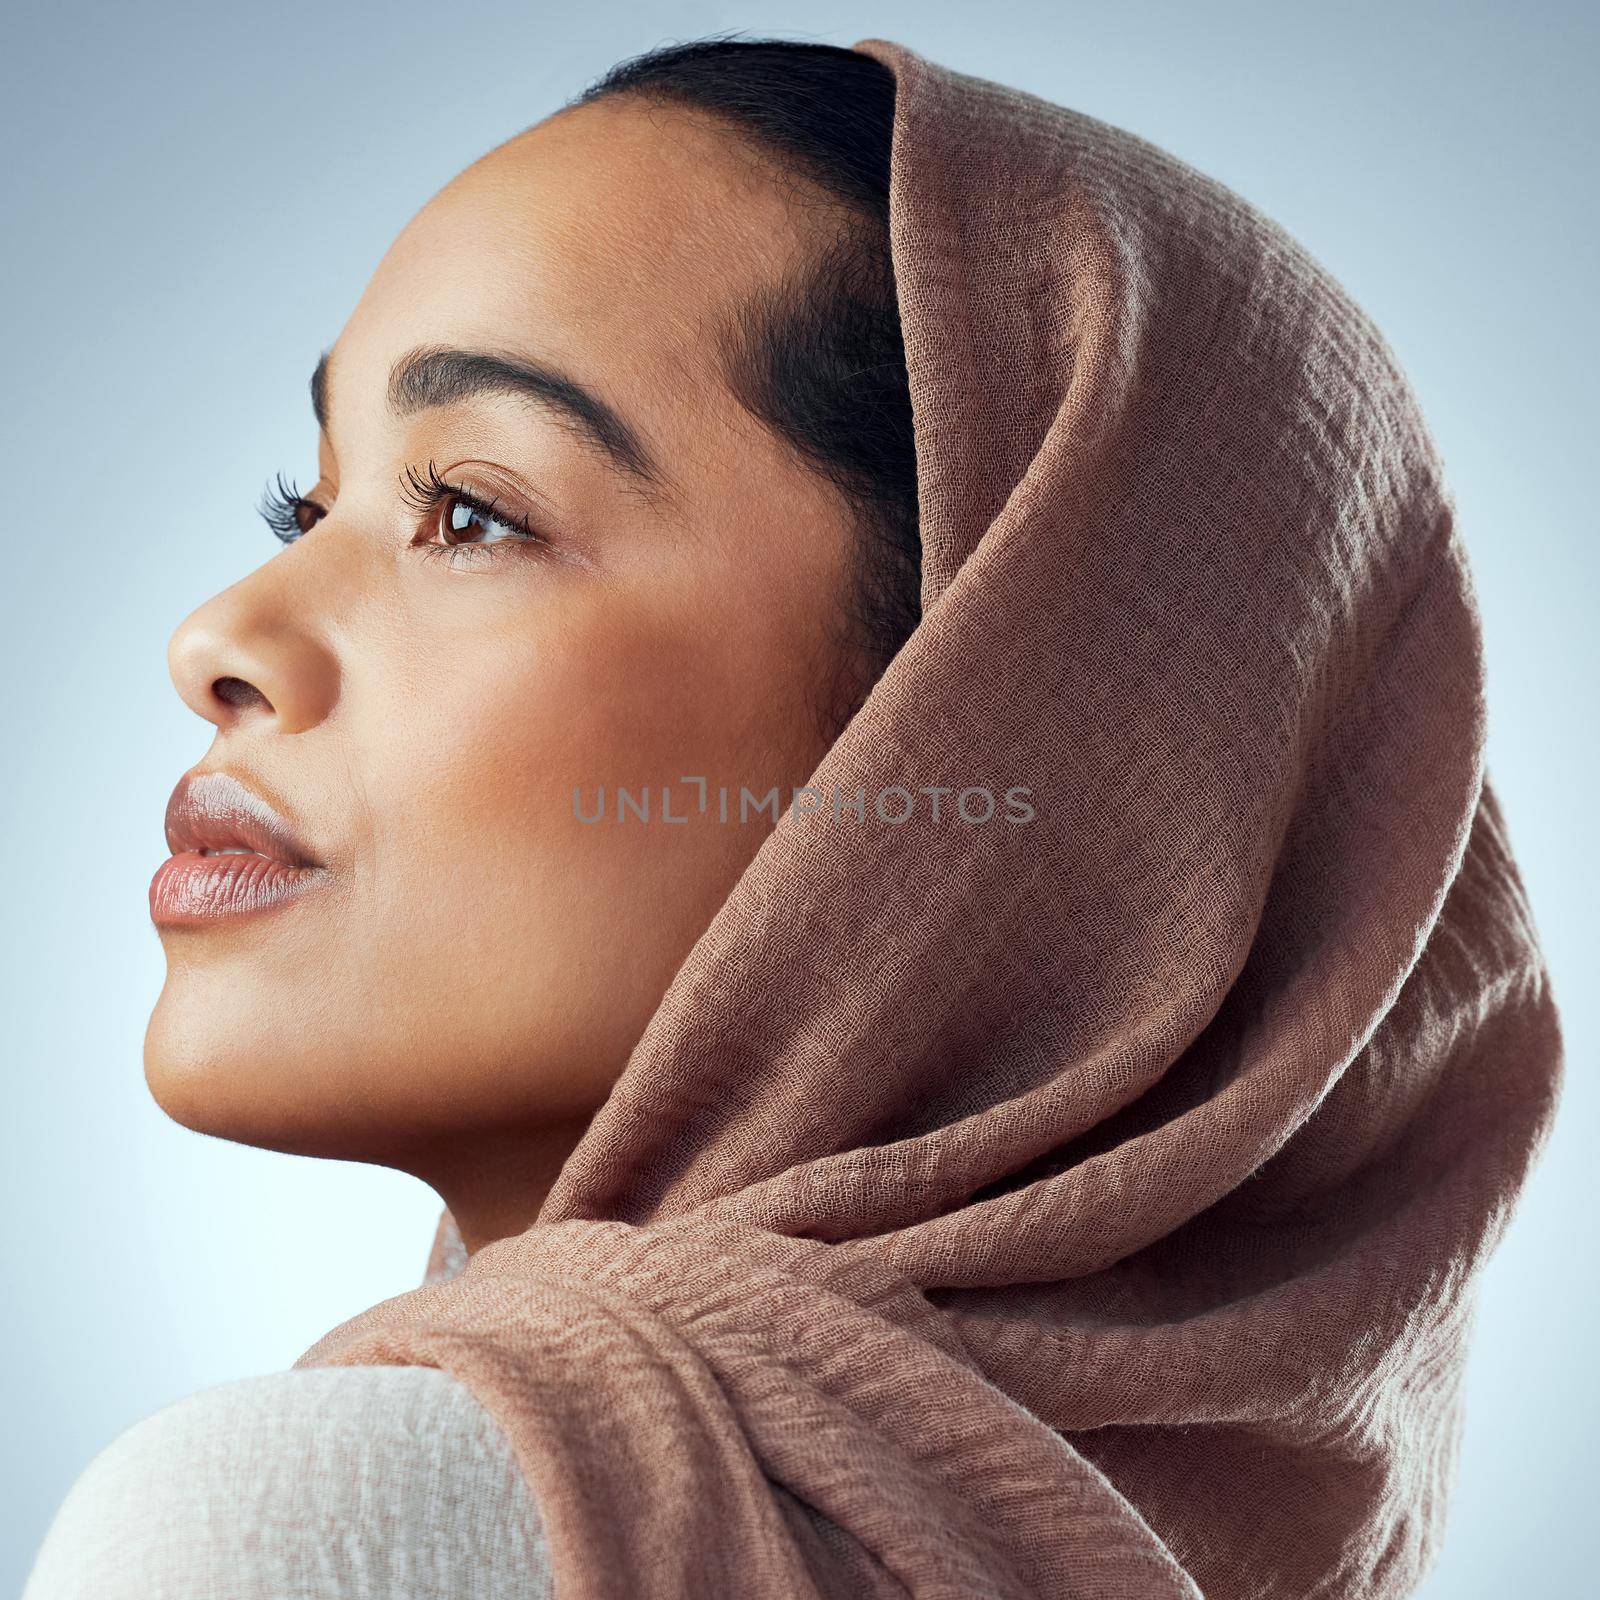 Studio shot of a beautiful young woman wearing a headscarf against a grey background.